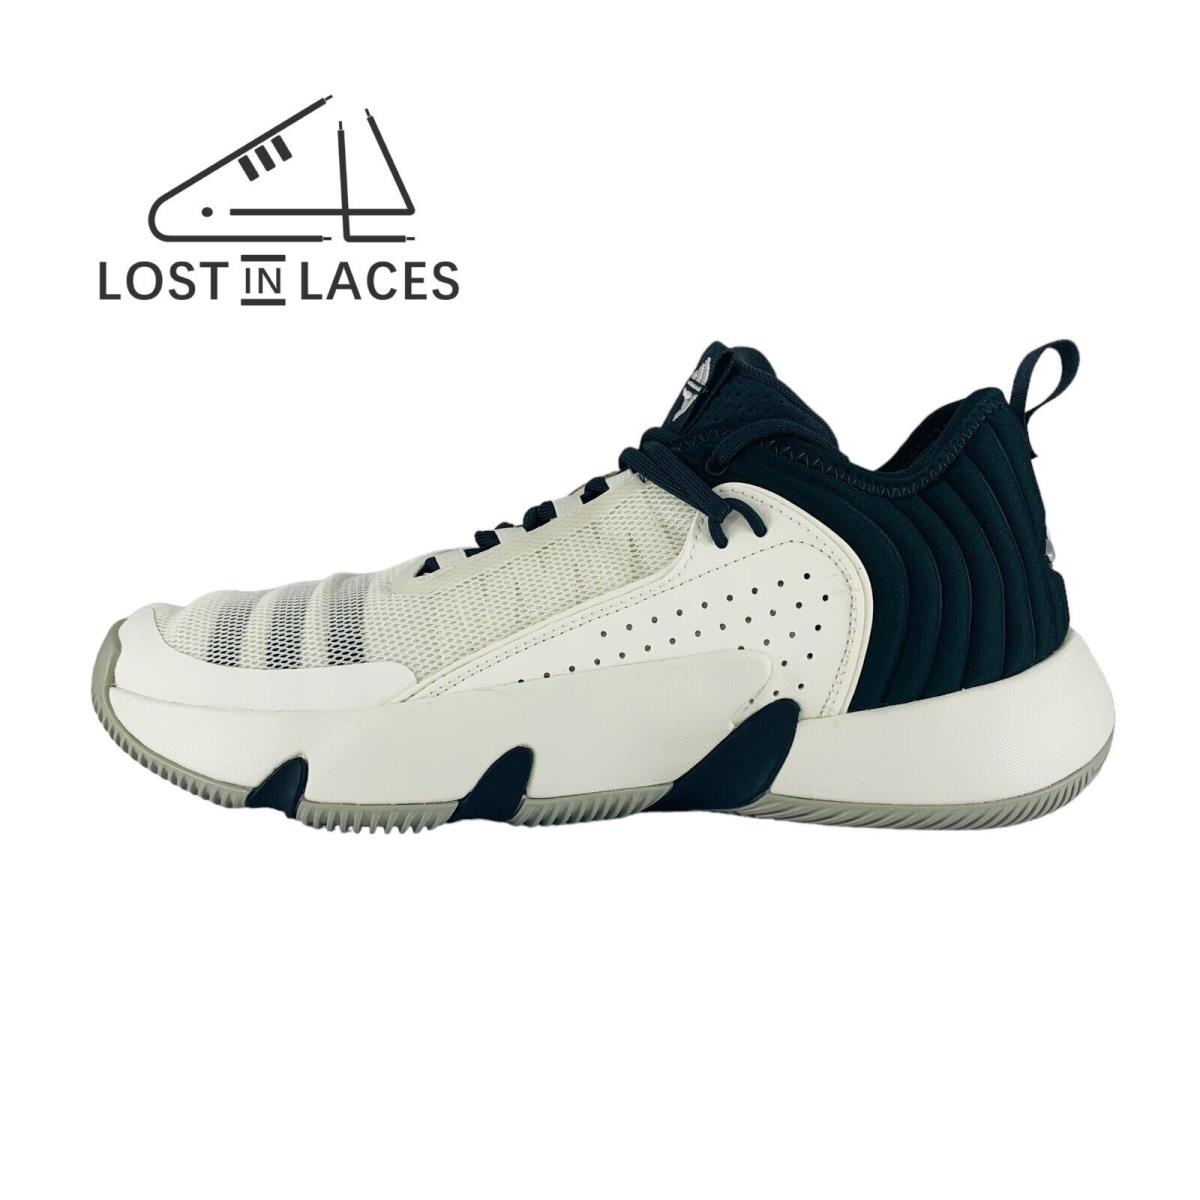 Adidas Trae Unlimited White Black Sneakers Men`s Basketball Shoes IF5609 - White